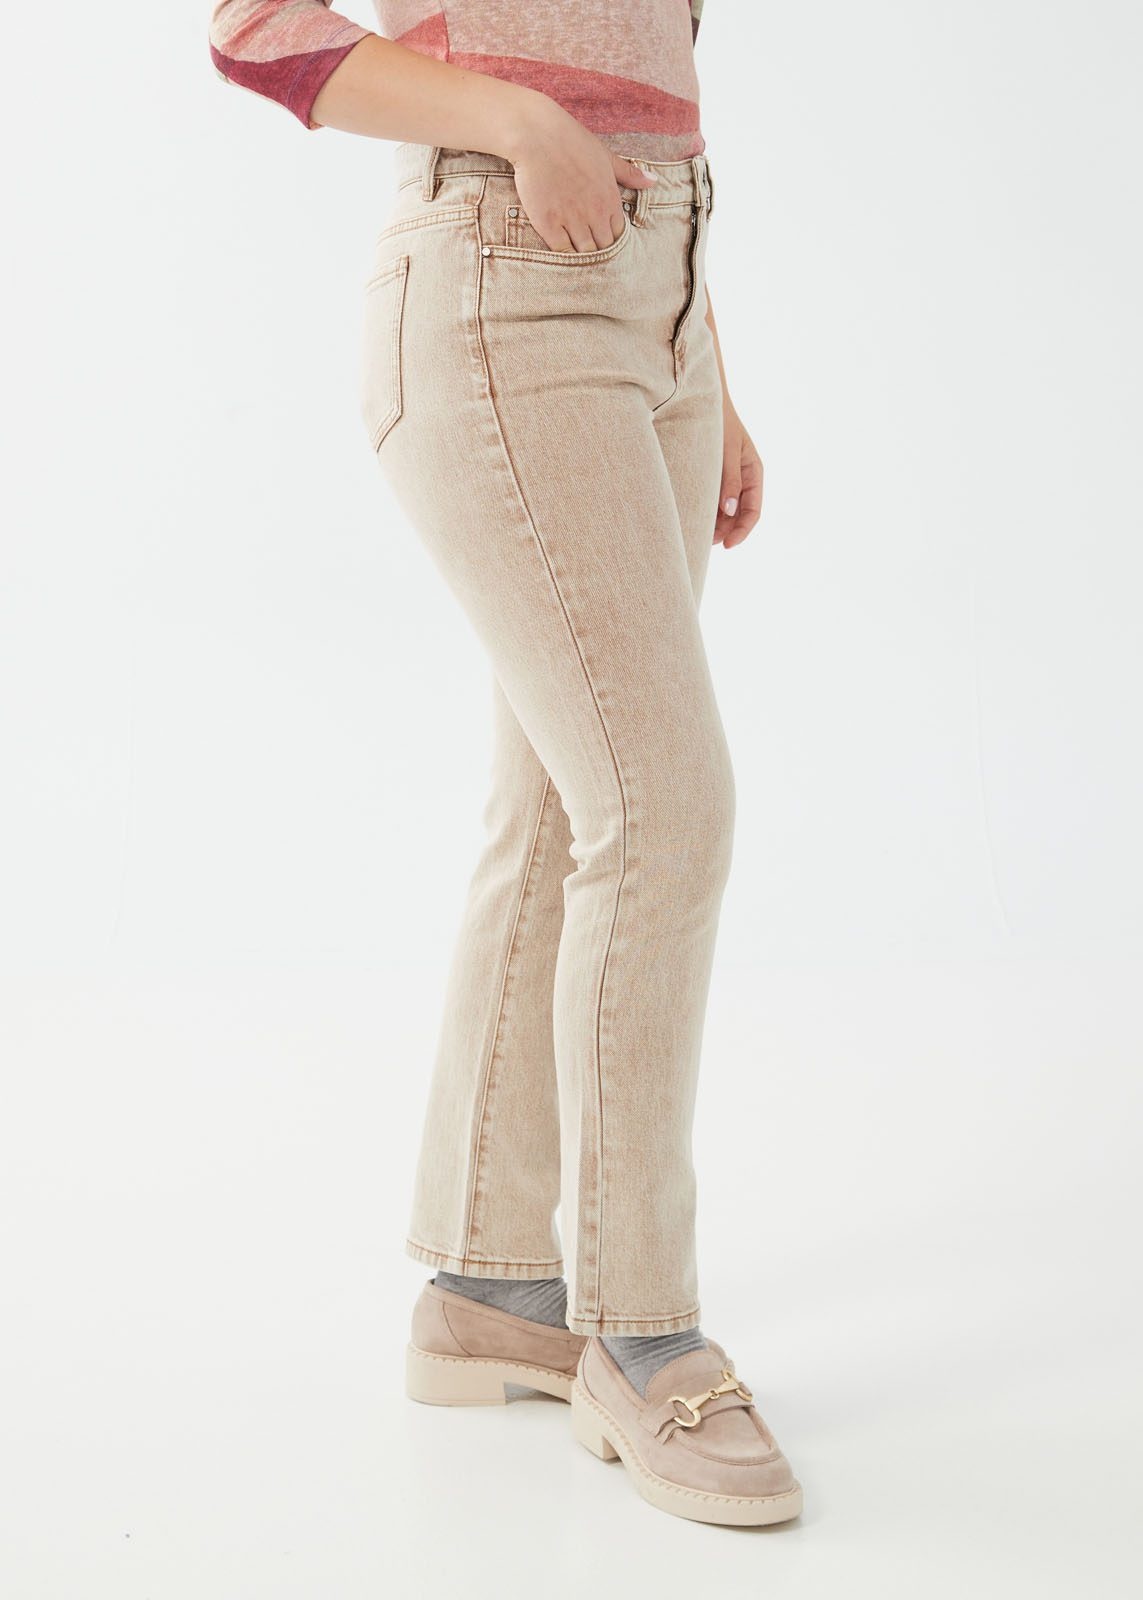 French Dressing Olivia Straight Ankle Jean Tan